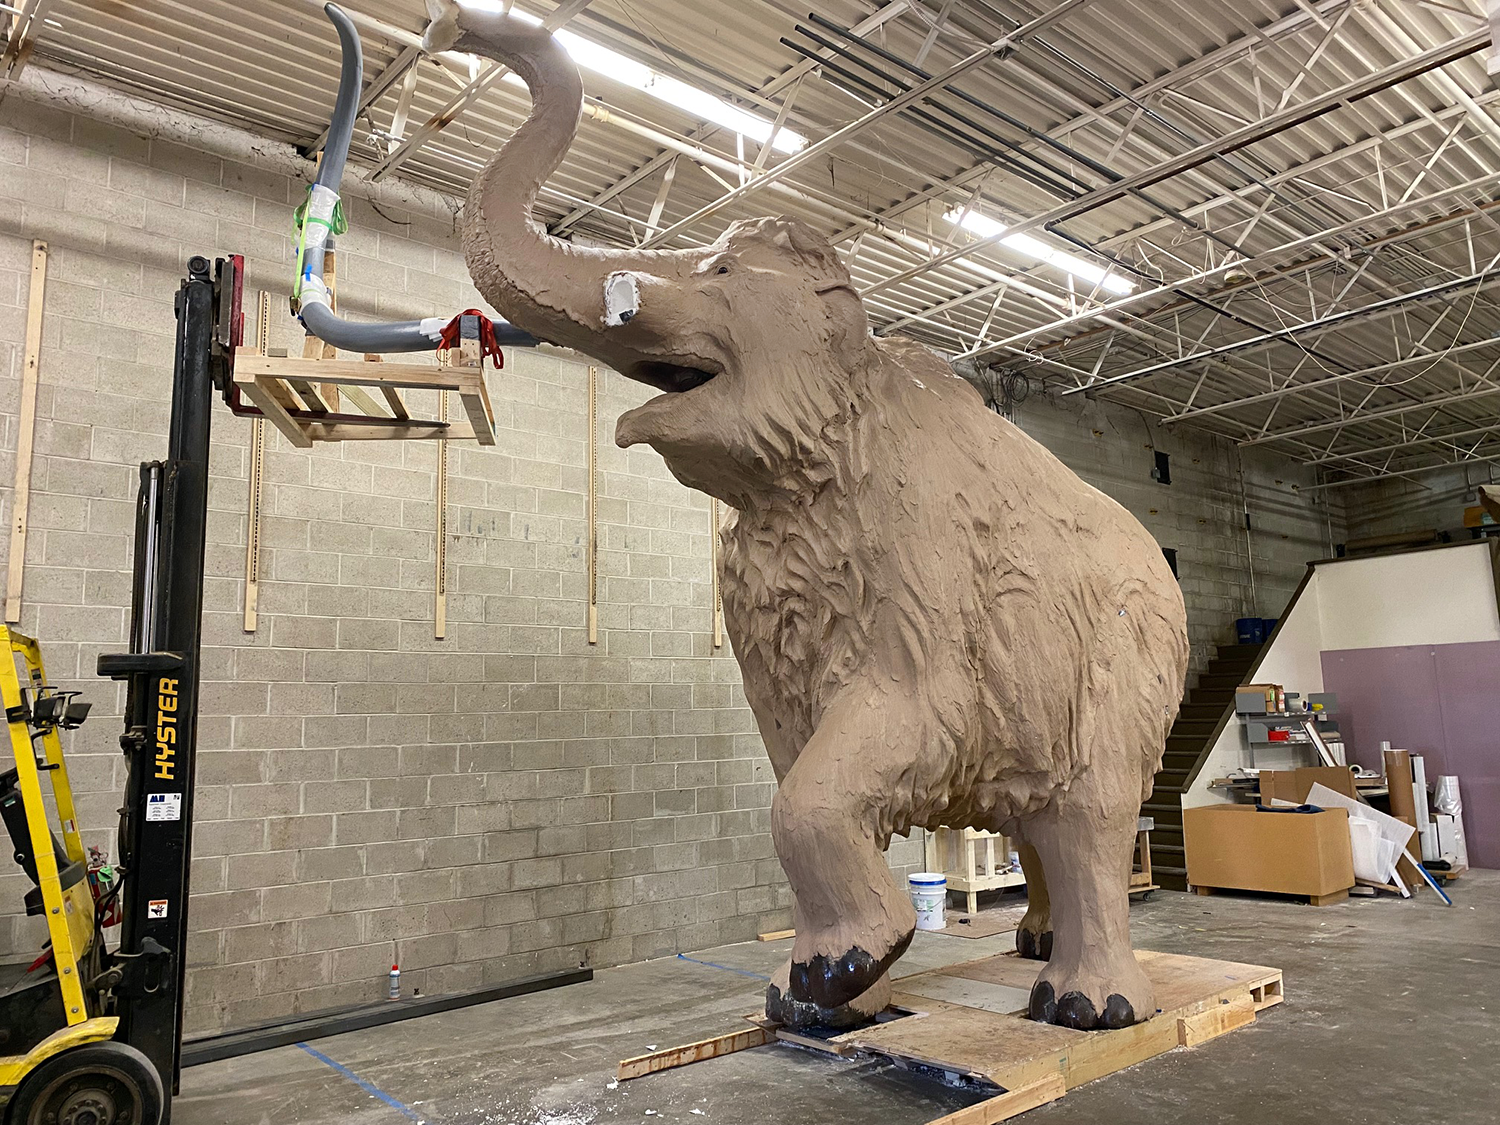 The mammoth statue, which is currently unfinished, will soon make its way to its final home on the south side of the Natural History Building.